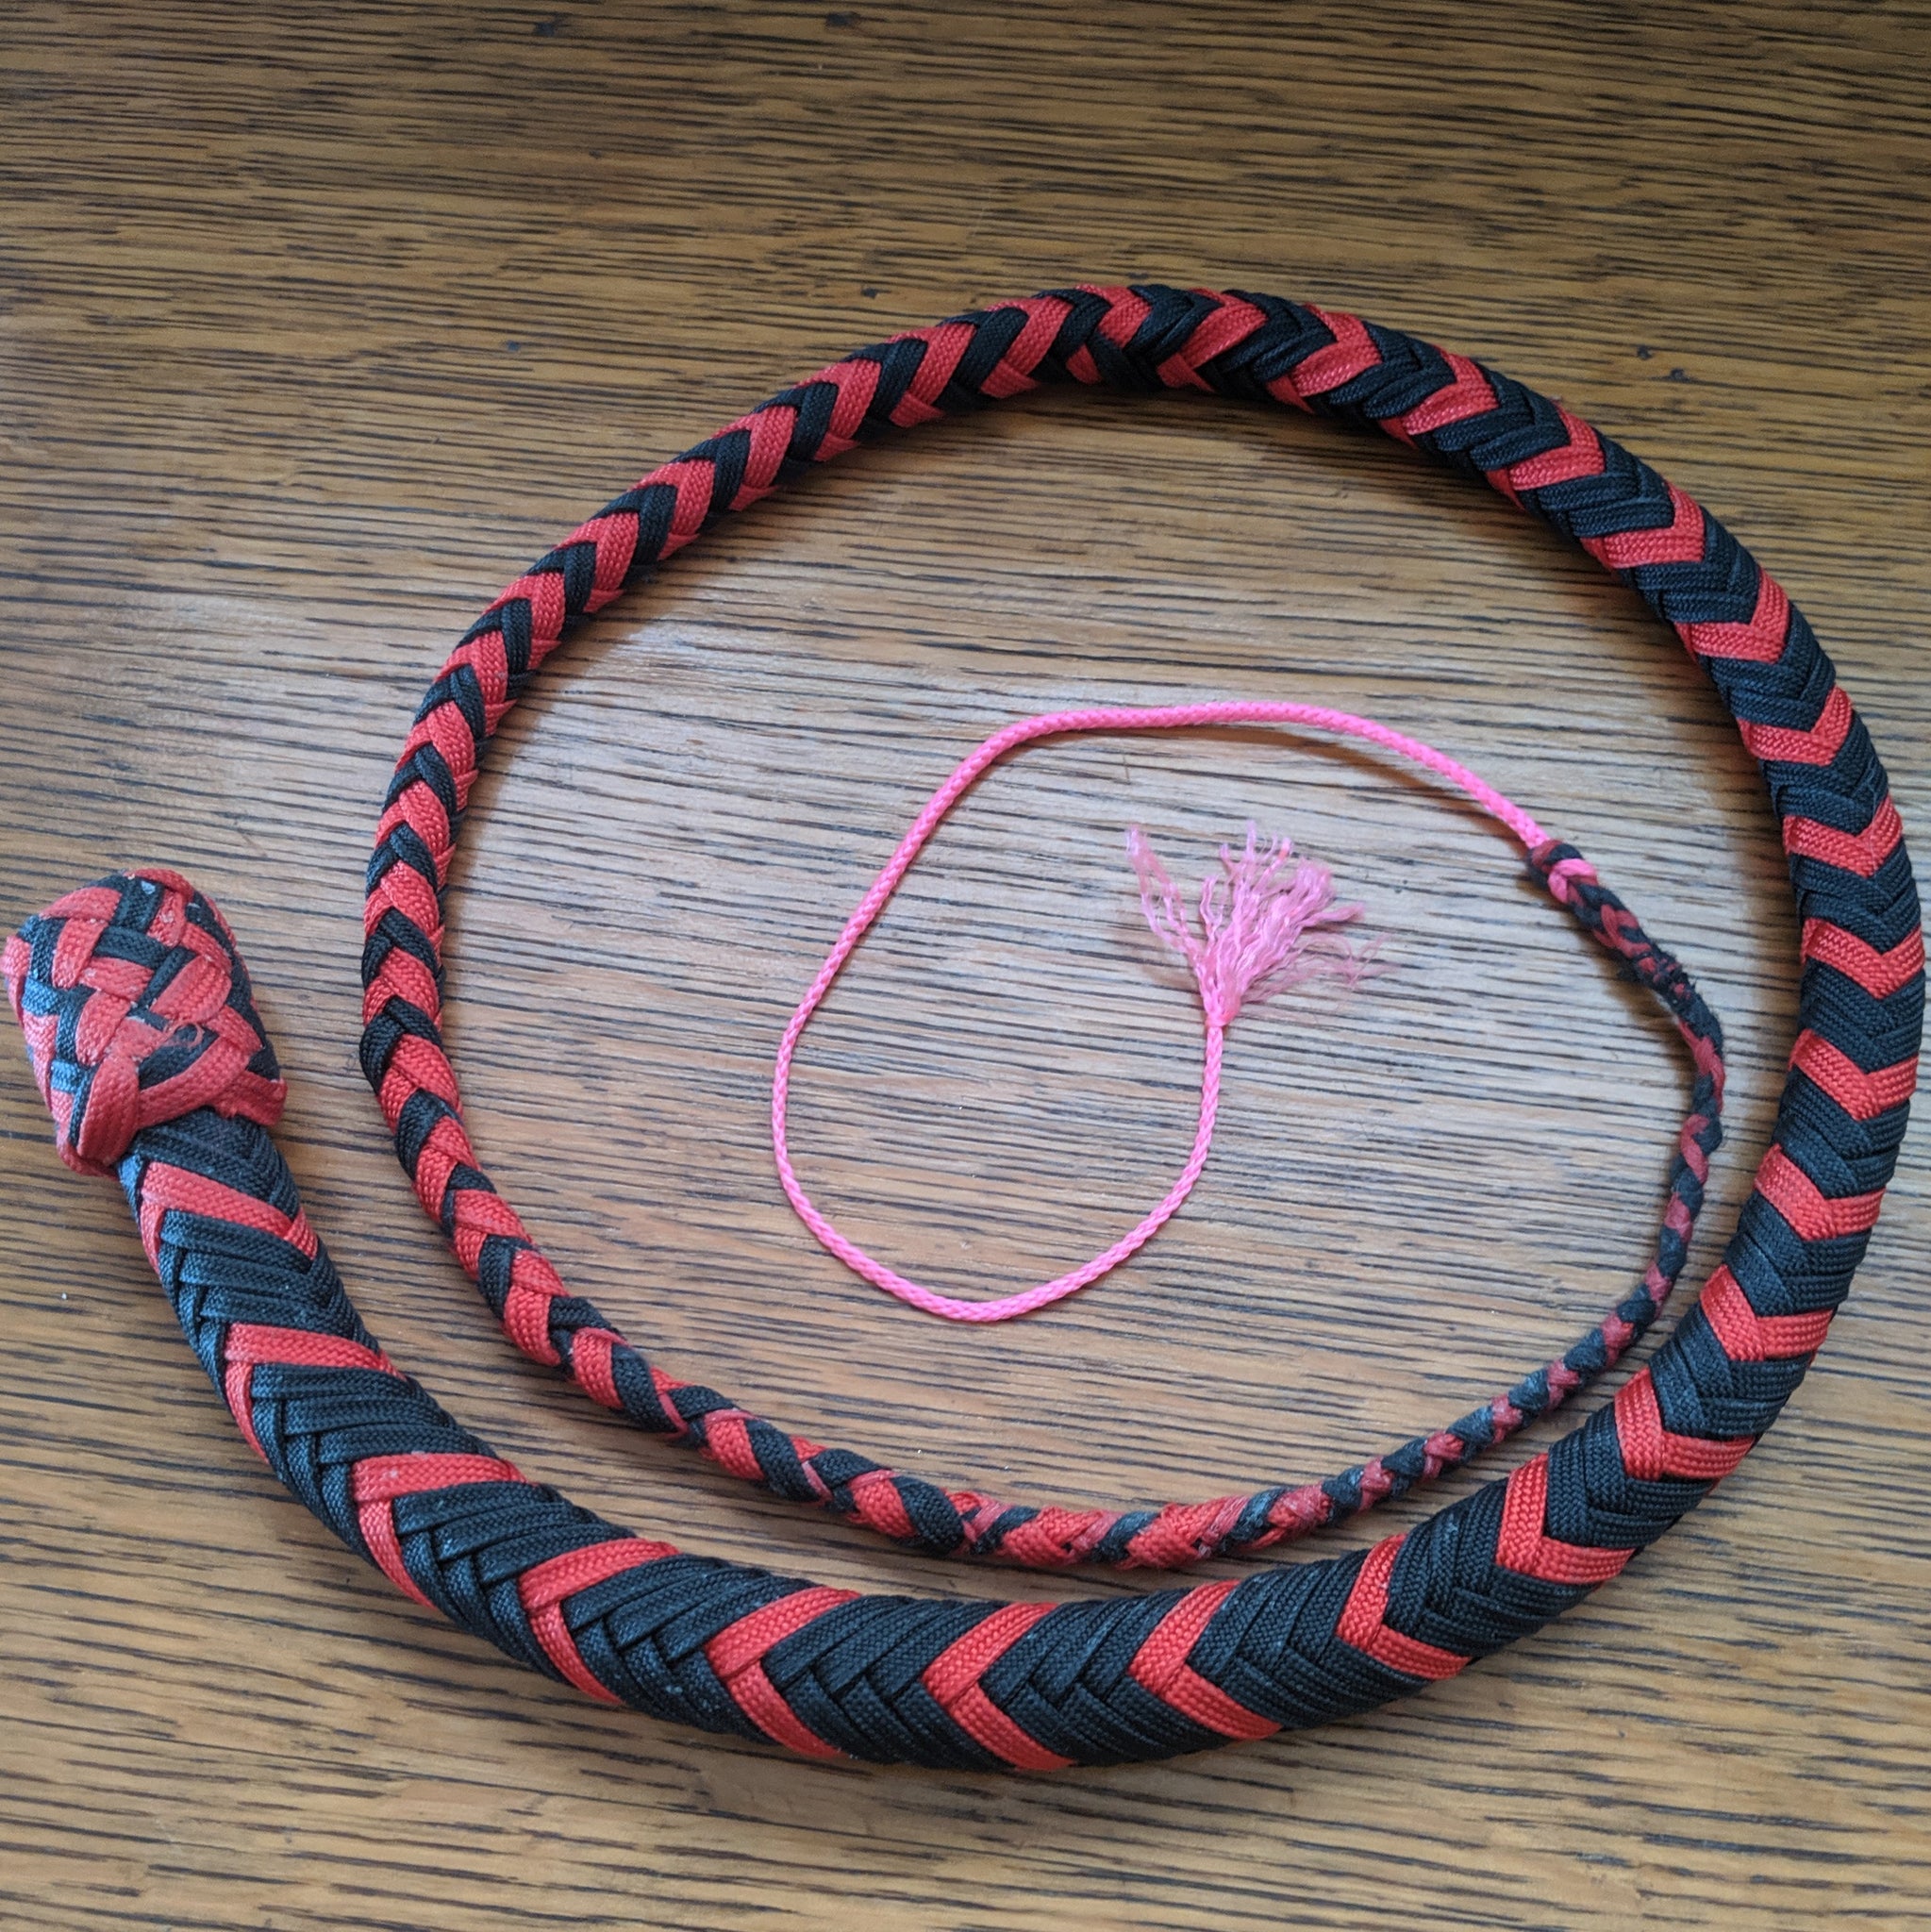 Snake Whip -Signal in Whipmaker Cord or Paracord